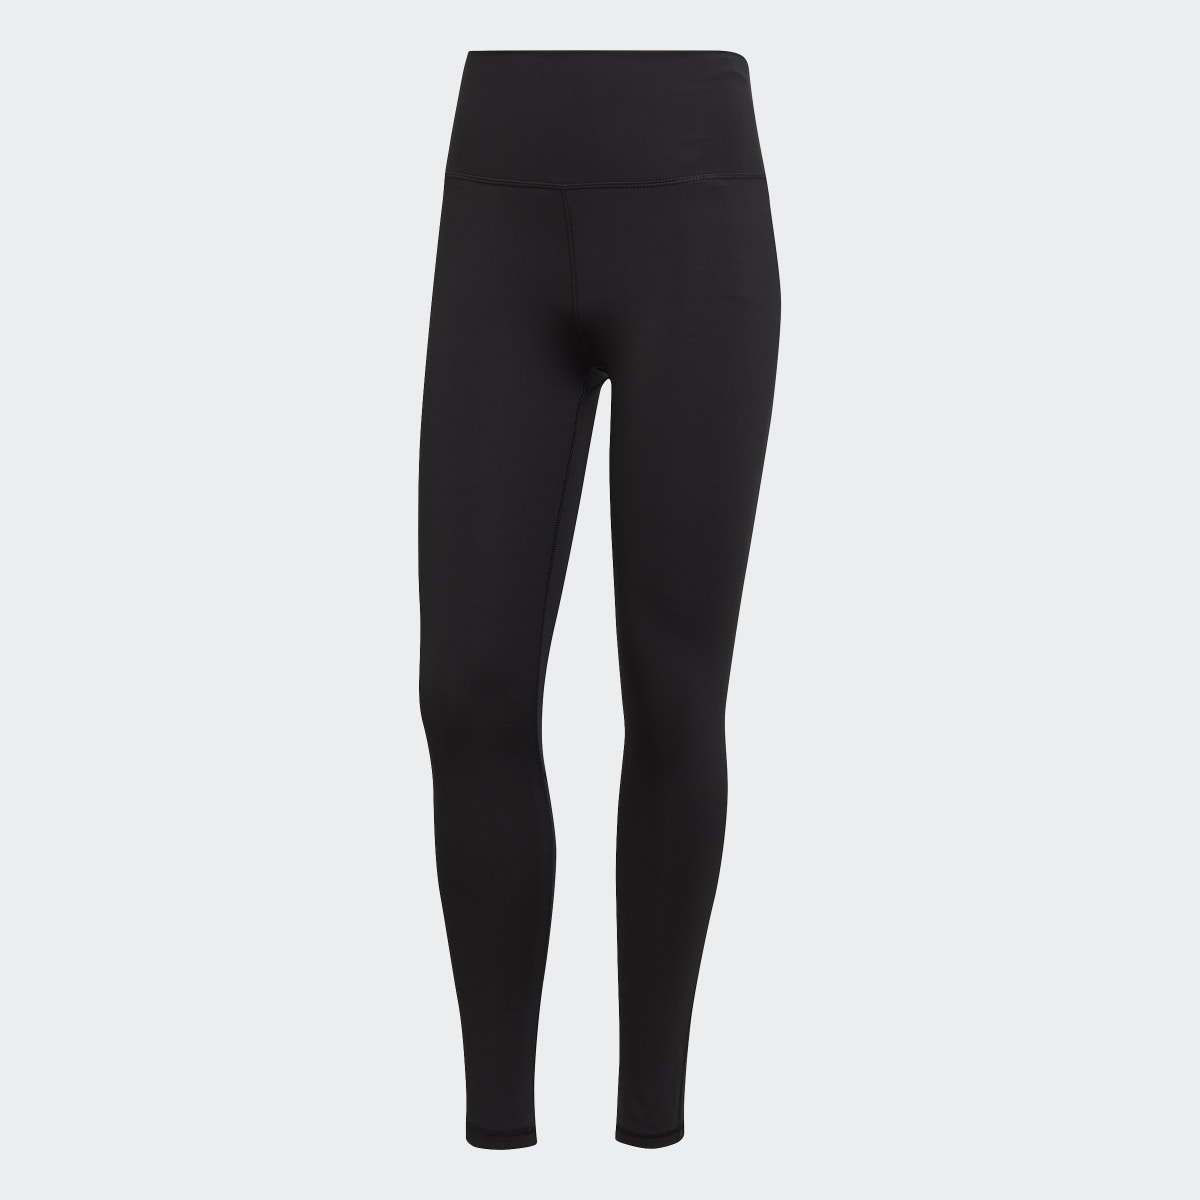 Adidas Optime Training Period-Proof 7/8 Tights. 4